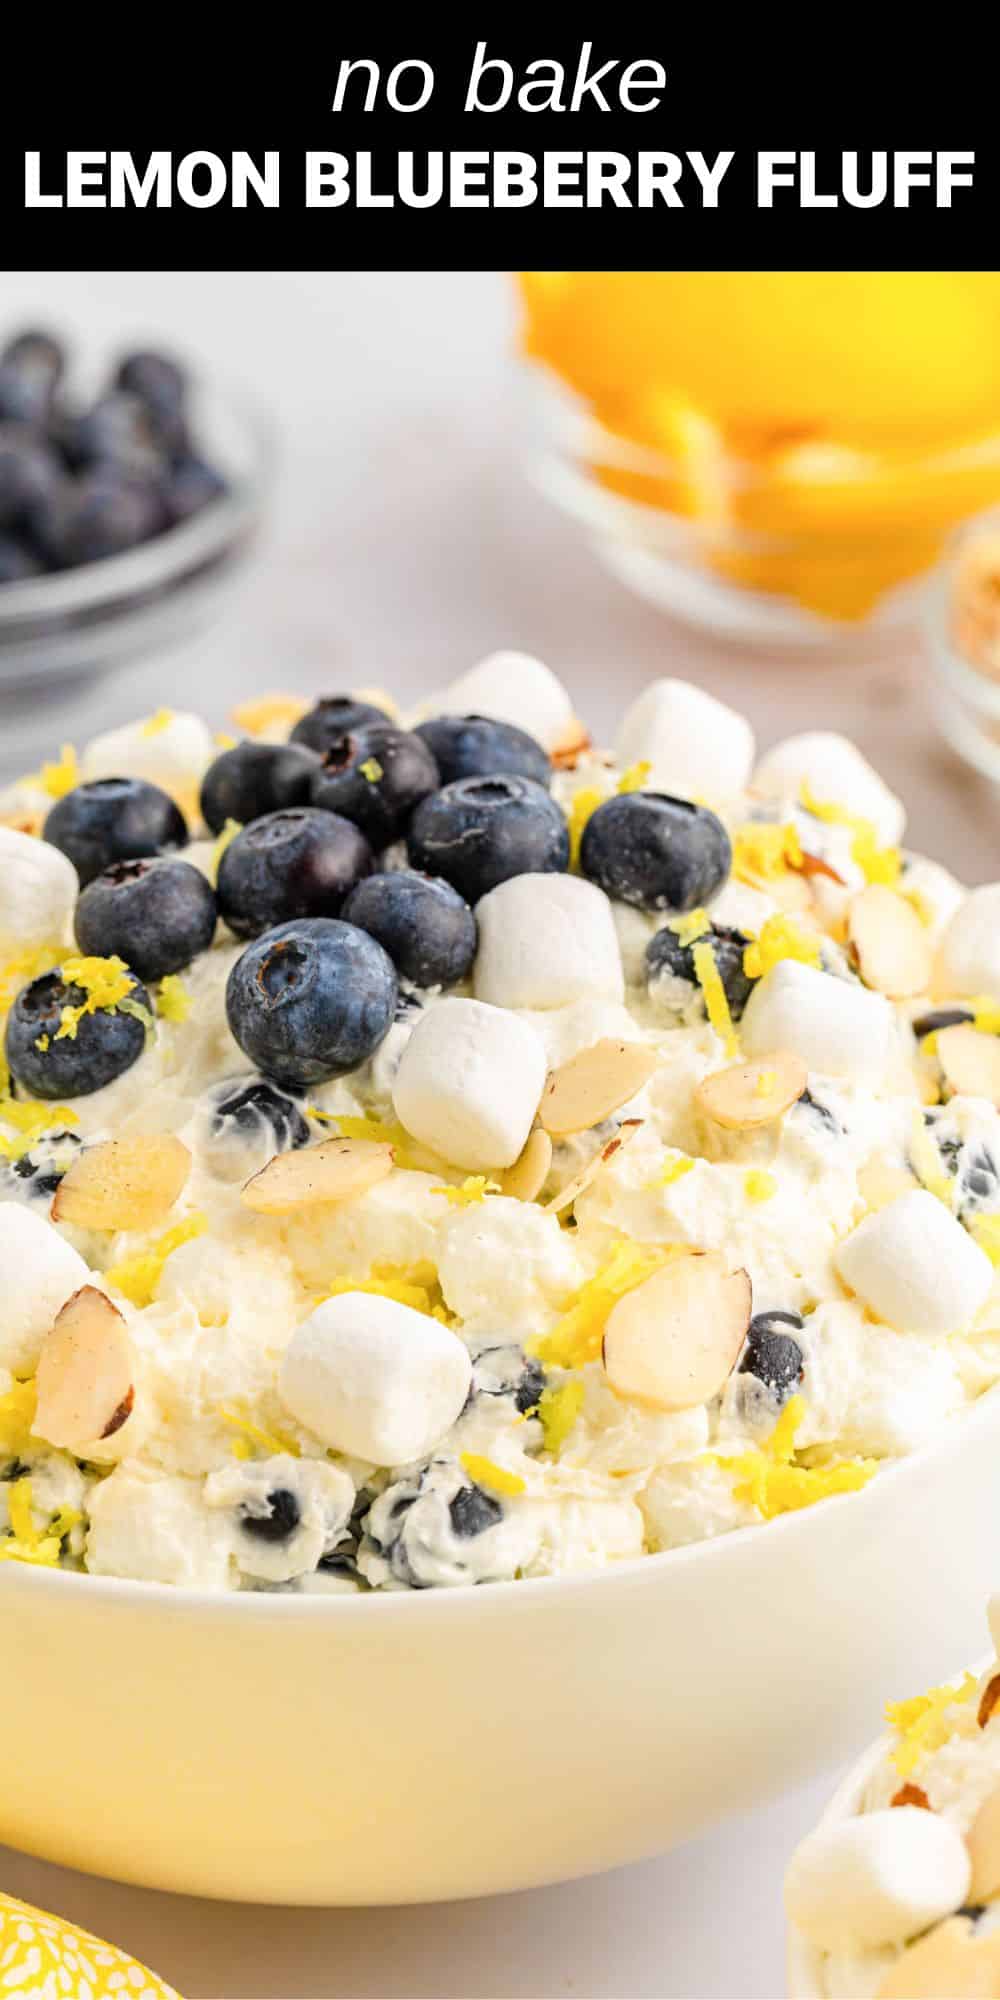 This delightfully delicious Lemon Blueberry Fluff recipe combines a light and creamy texture with pops of fruity sweetness. It's easy and refreshing no-bake tasty dessert salad that's perfect for any occasion! 